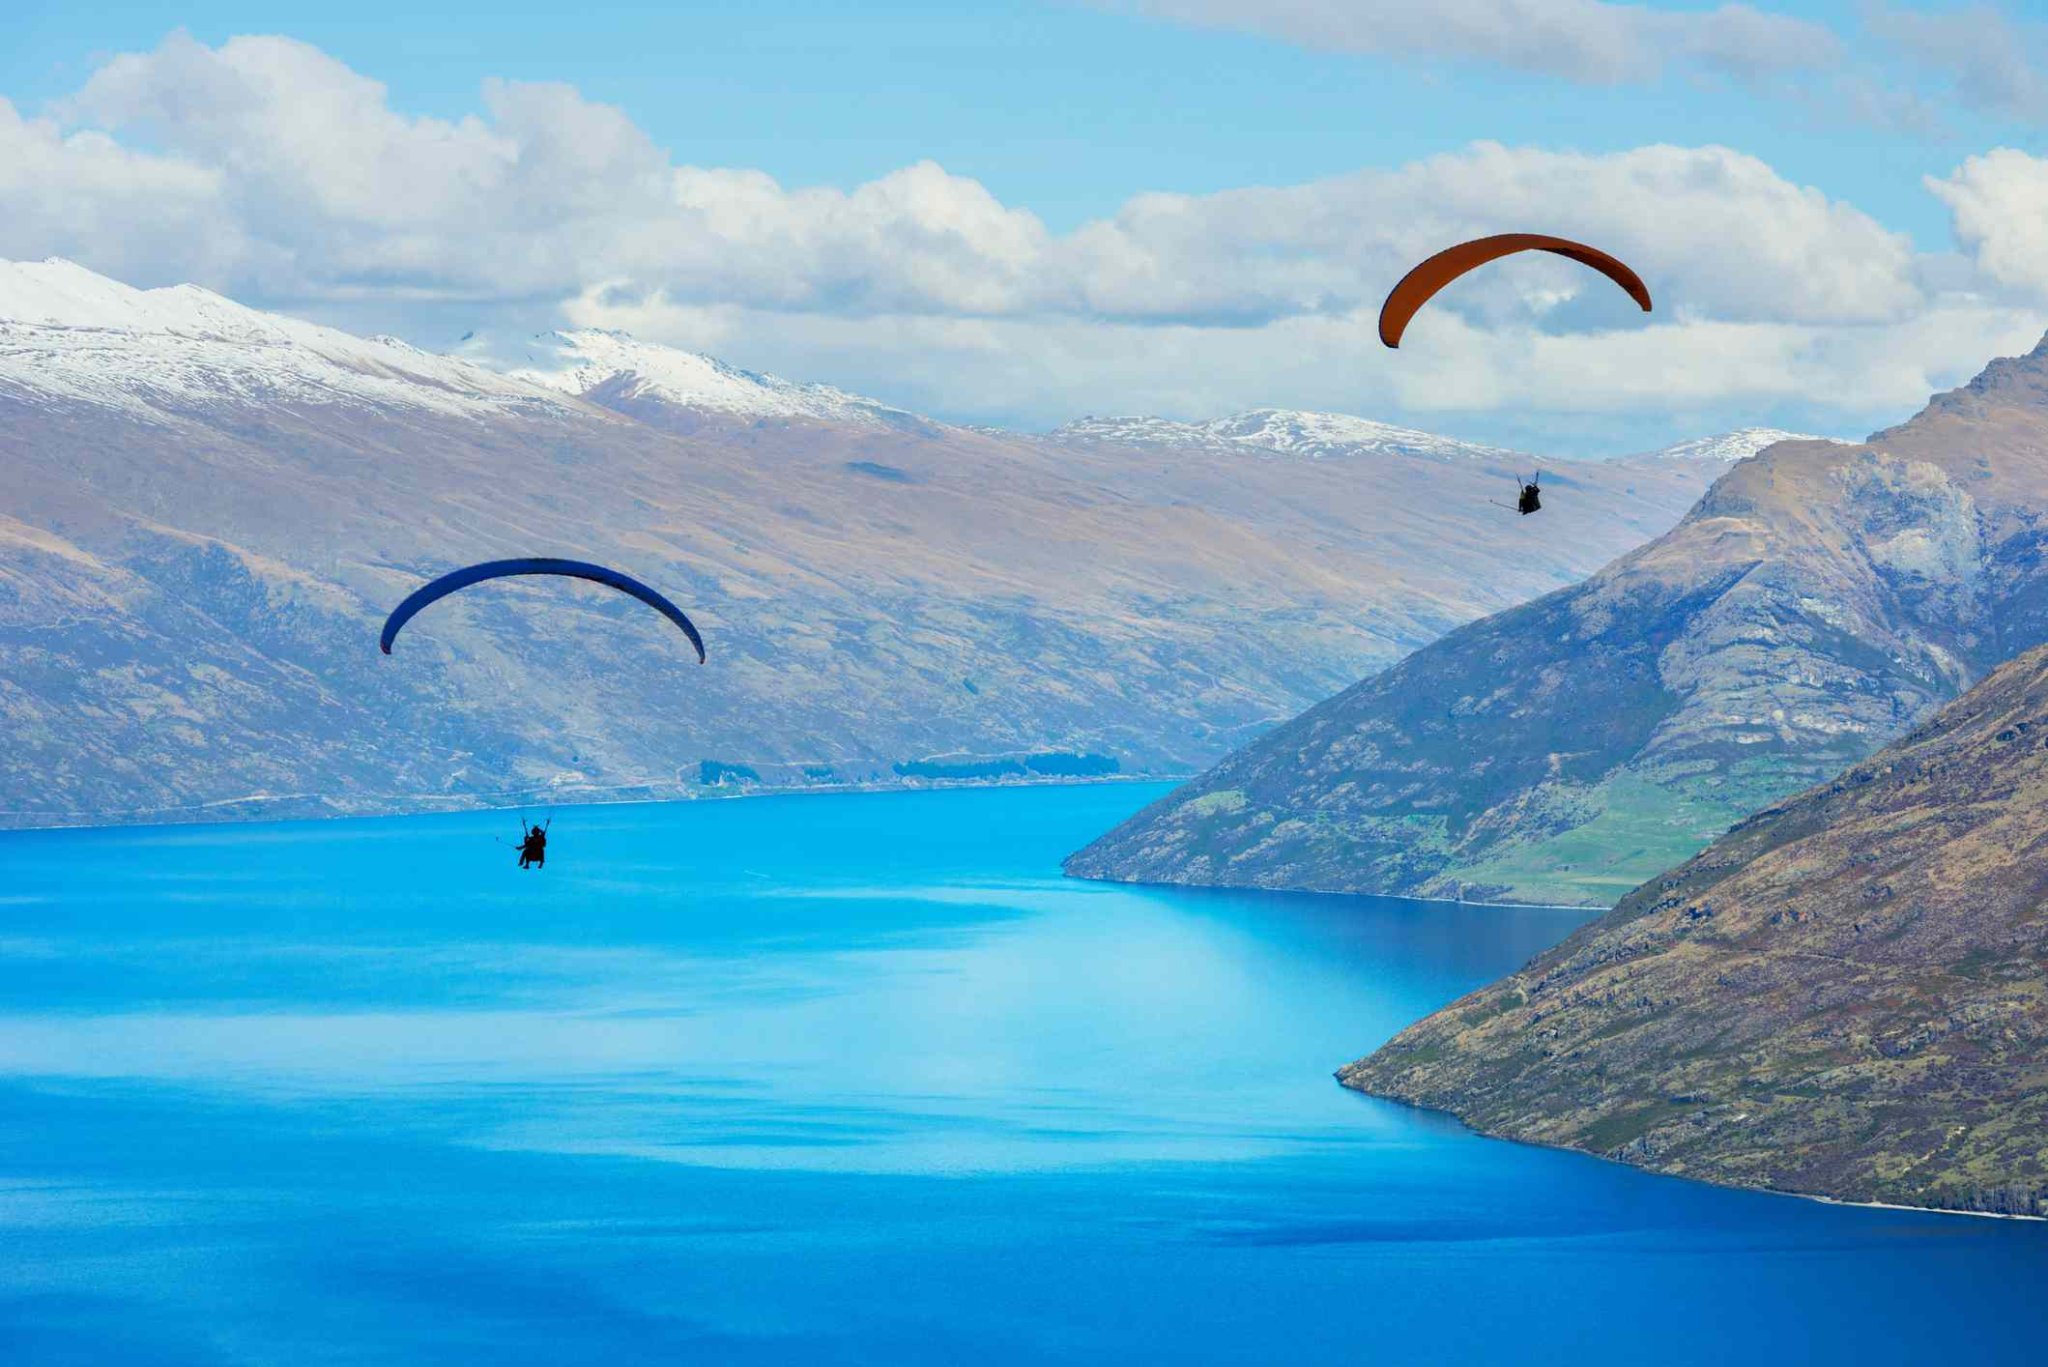 The Best Places in the World to Go Paragliding